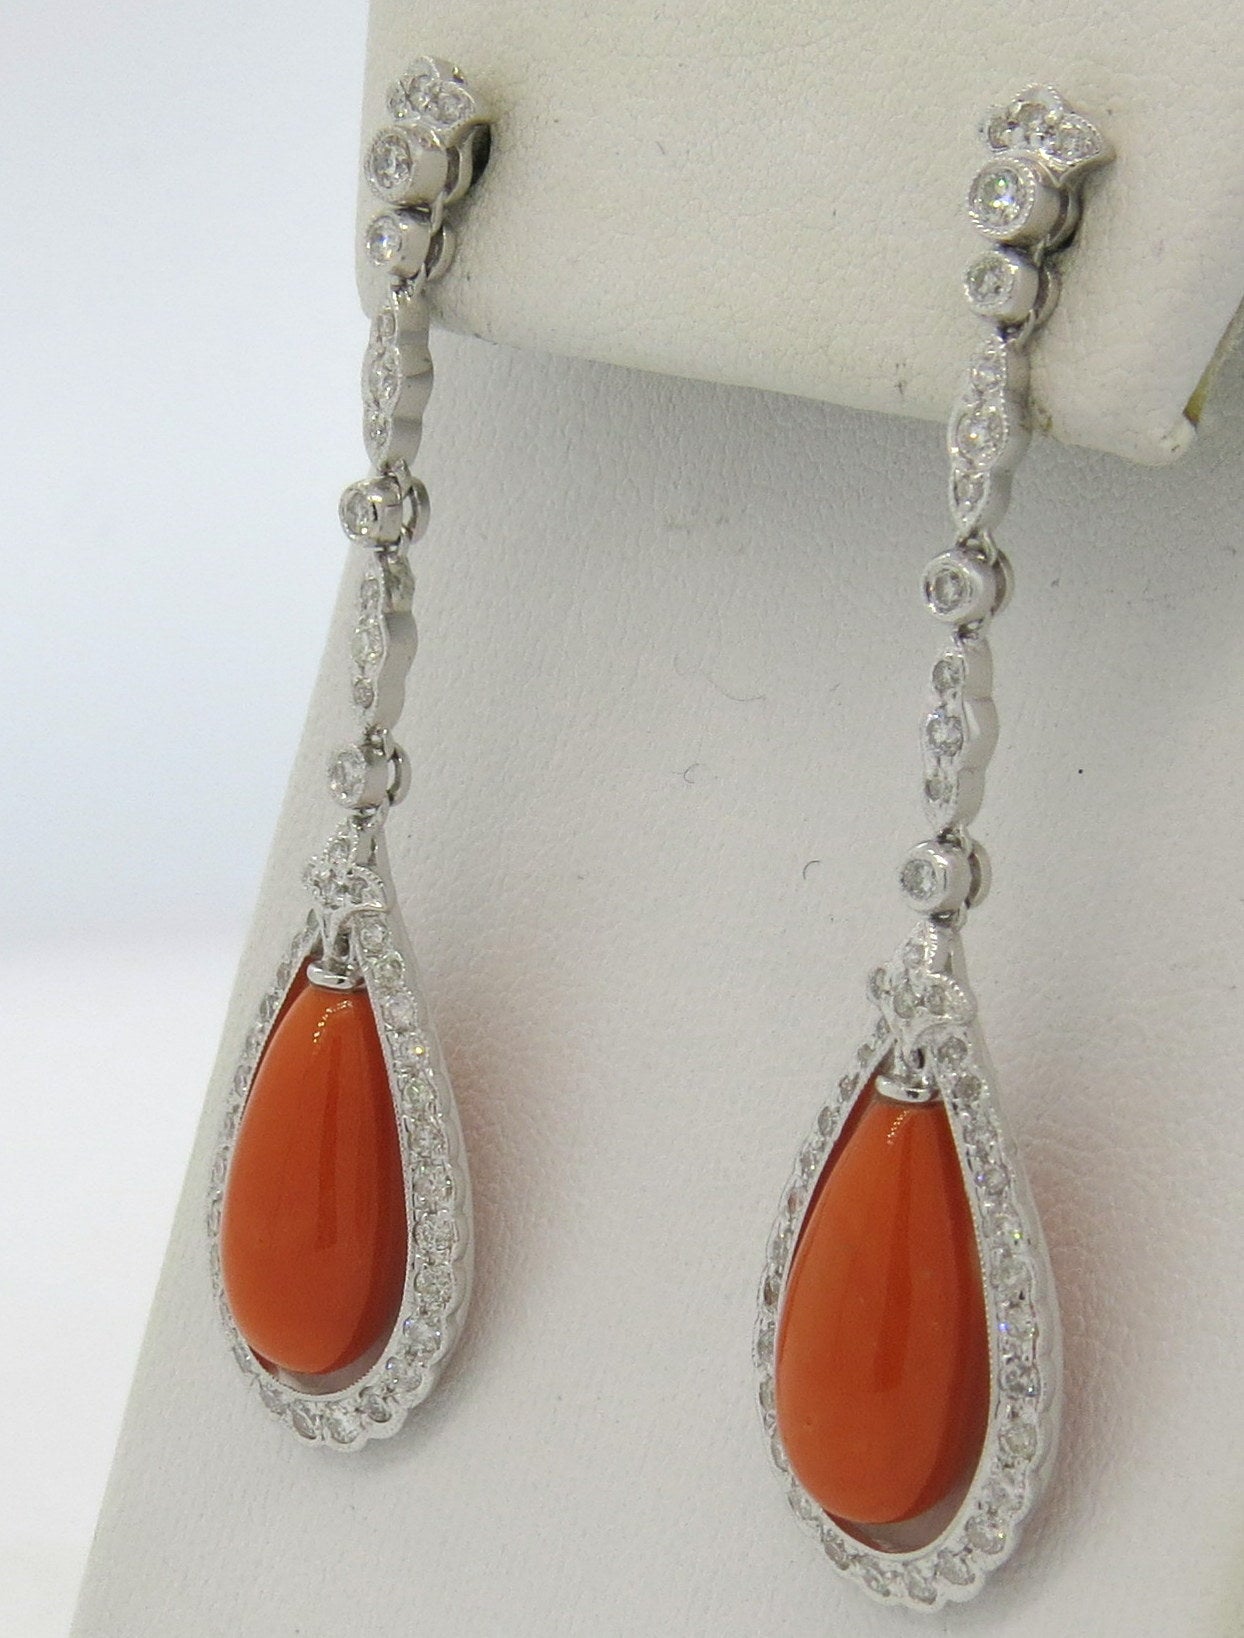 18k gold long drop earrings, featuring teardrop coral gemstones, adorned with approx. 1.20ctw diamonds. Earrings are55mm long x 15mm wide. Weight - 10.5 grams